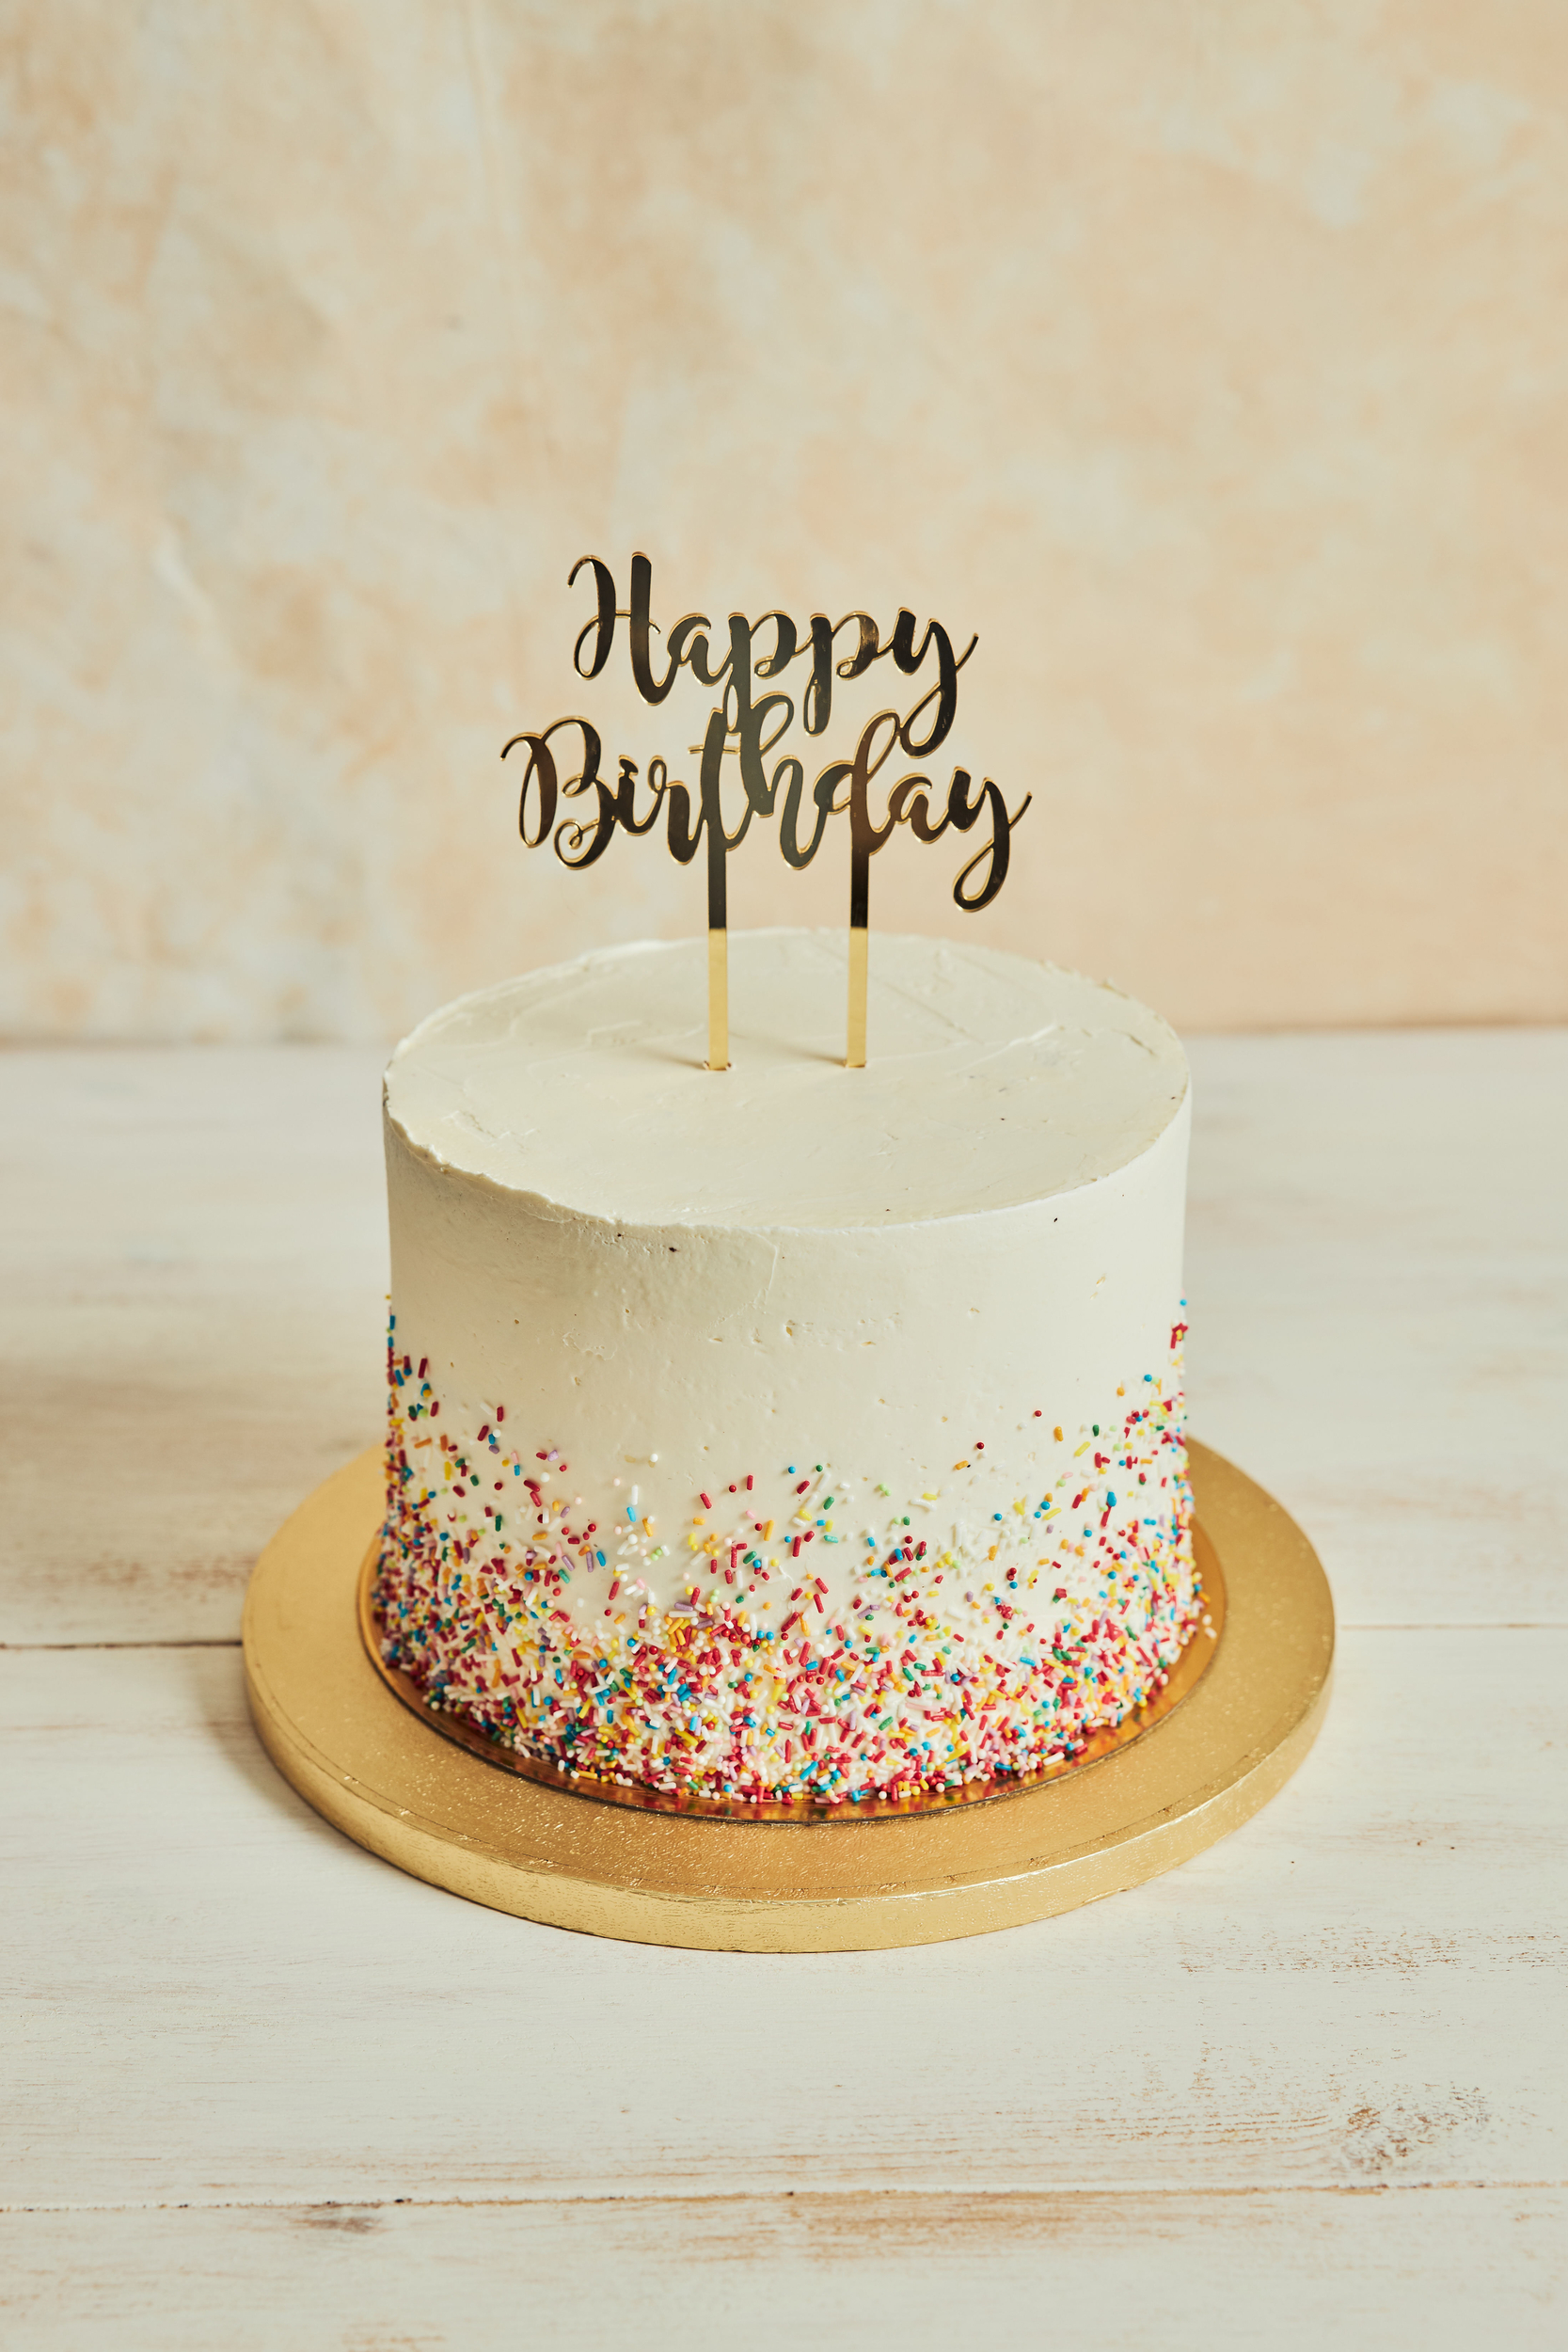 cake-with-happy-birthday-cake-topper-sprinkles-wooden-board-table